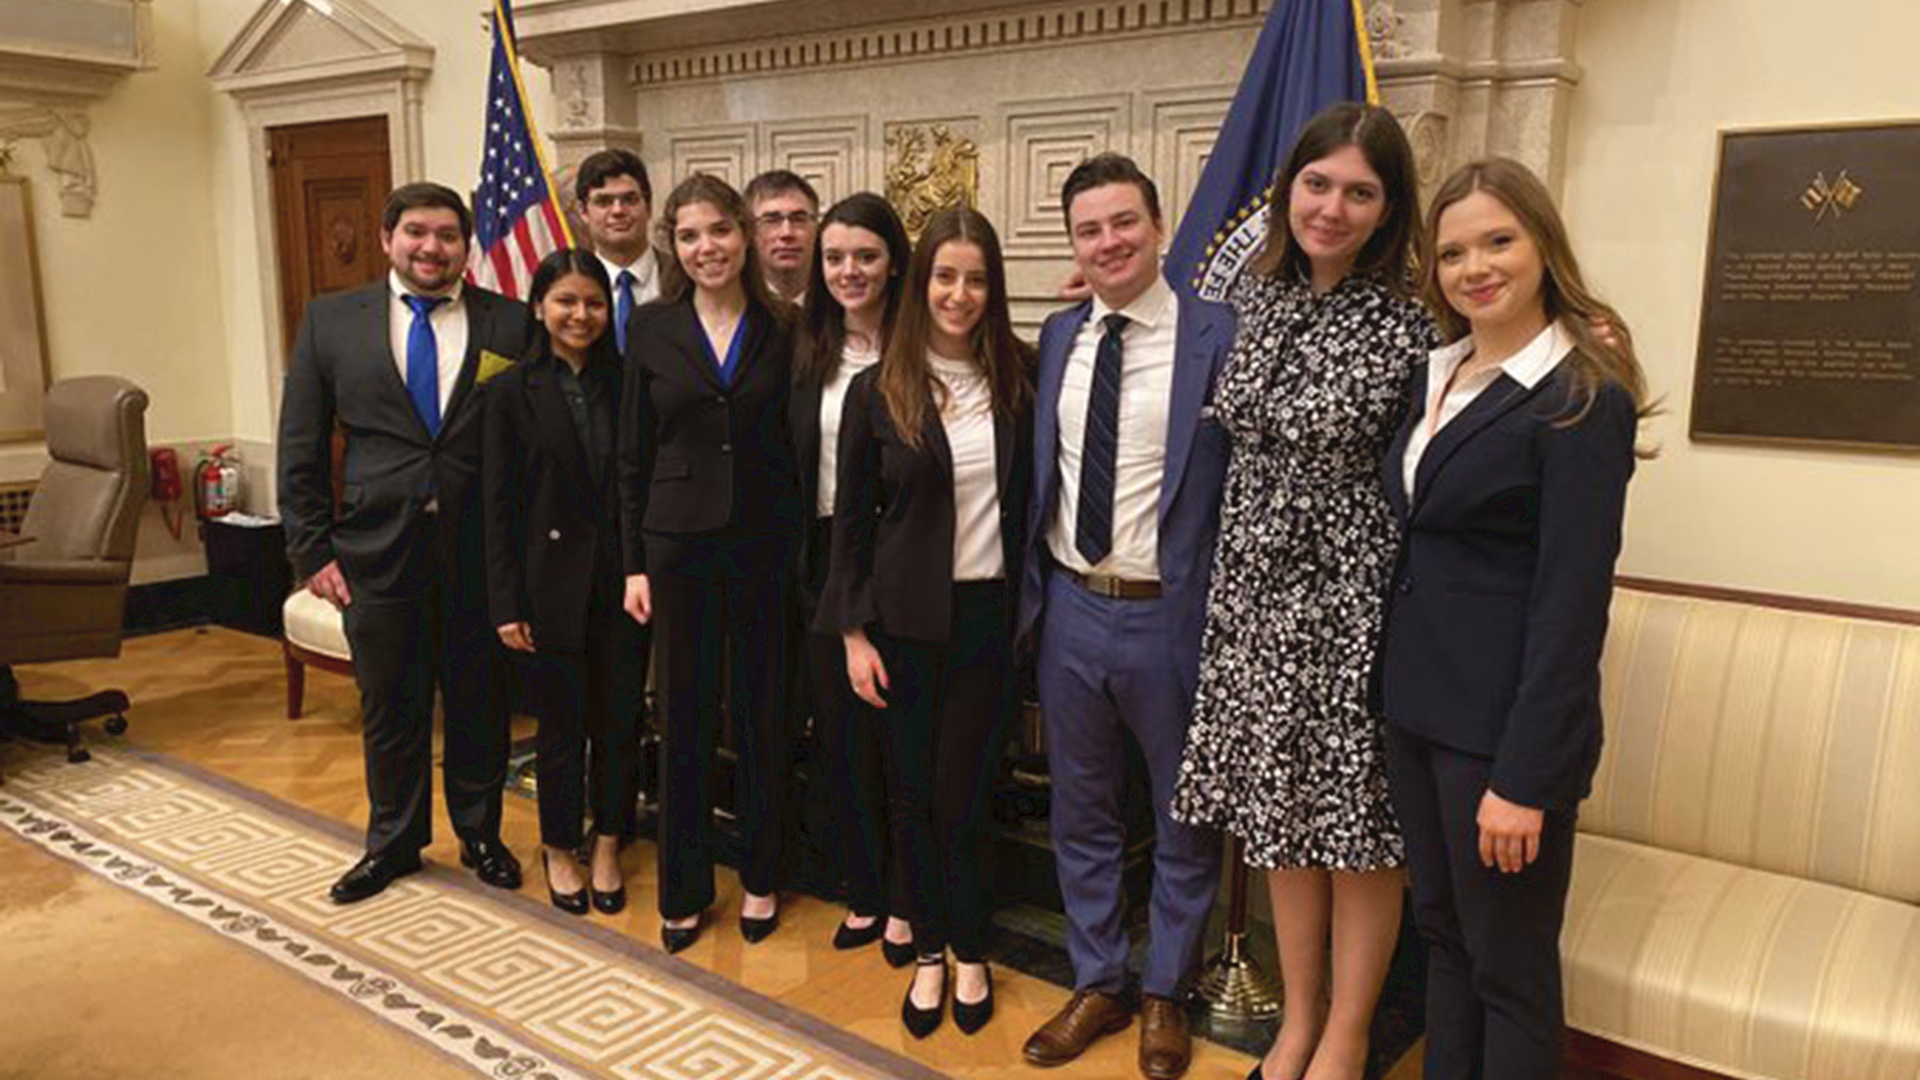 Pace University's “National College Fed Challenge” team